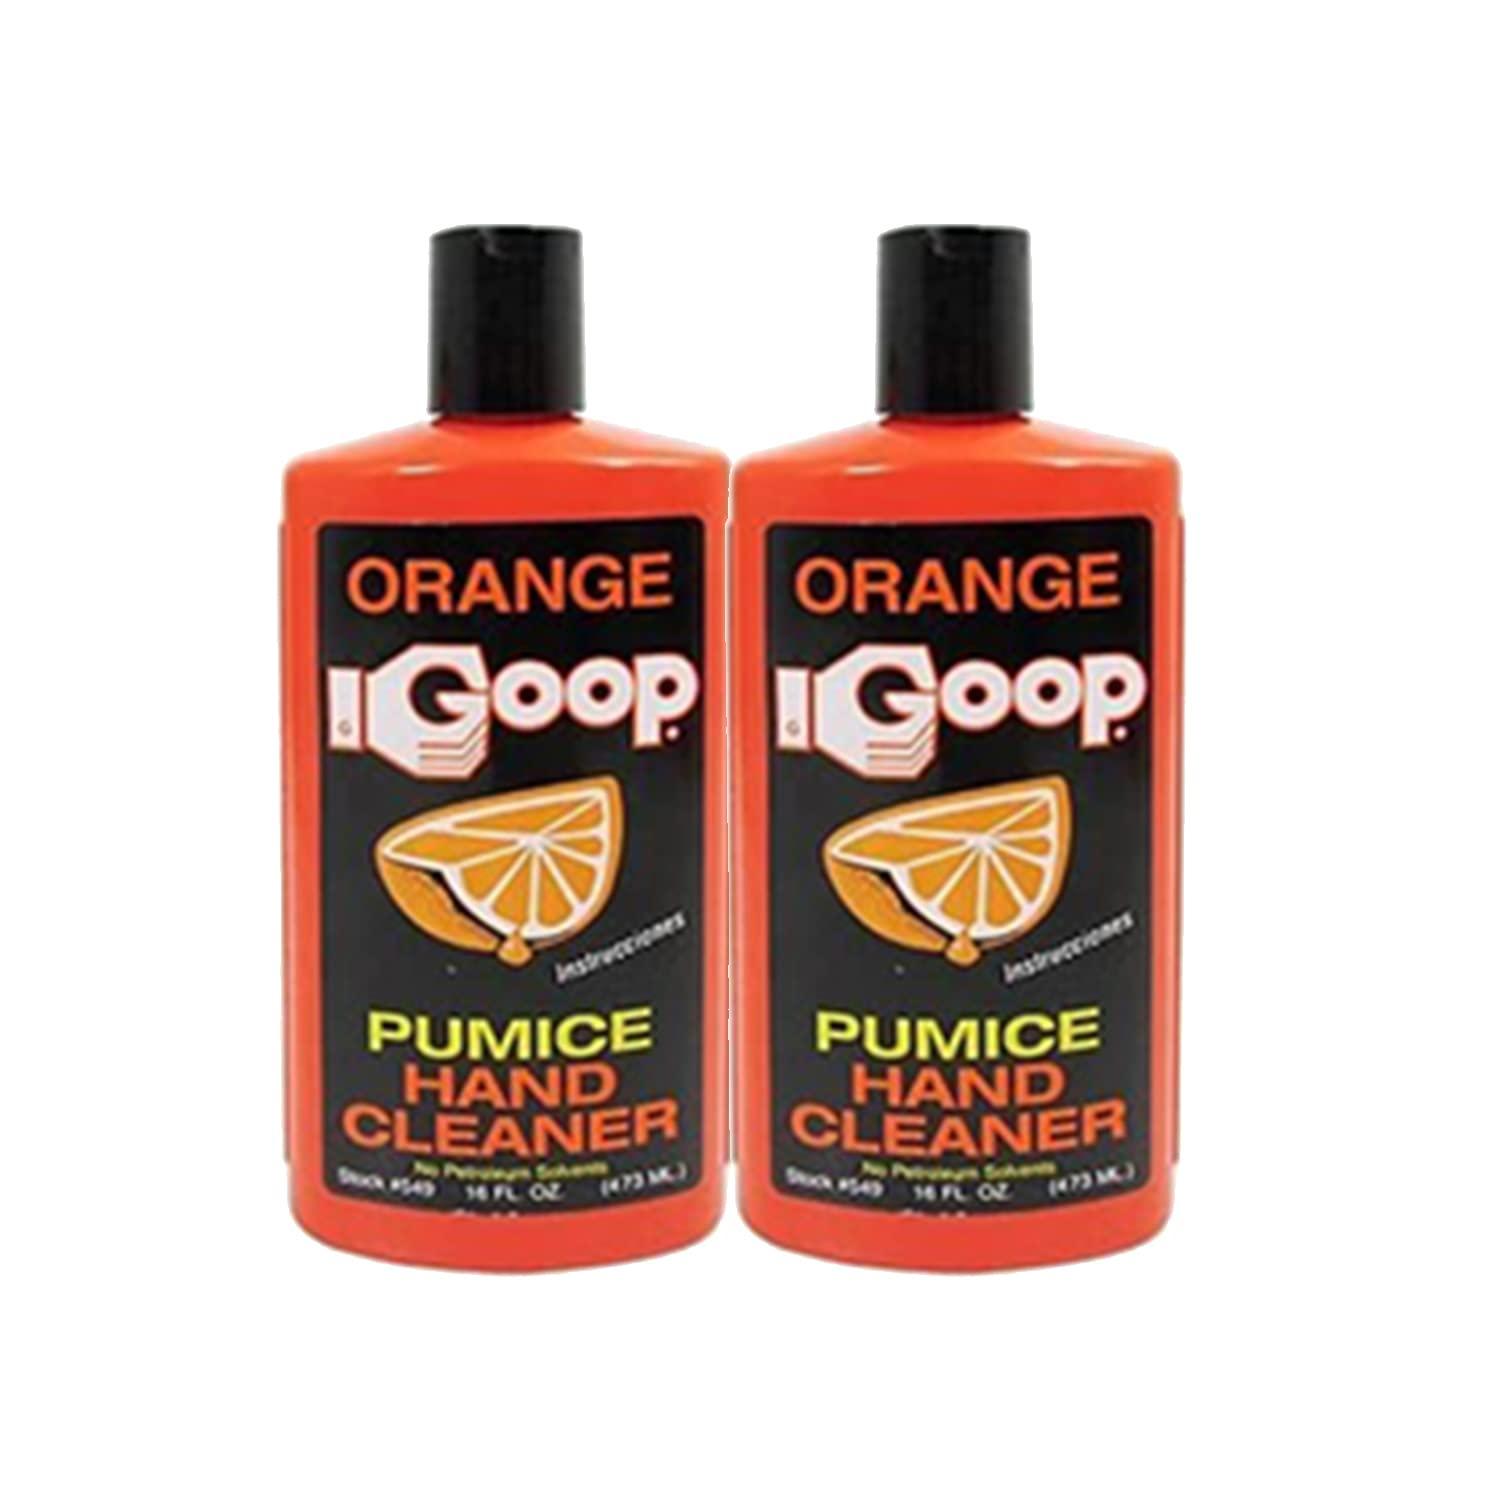 Goop Multi-Purpose Hand Cleaner Orange Citrus Scent and Pumice - Waterless Hand Degreaser and Laundry Stain Remover - 1 Gallon with Pump, Pack of 1